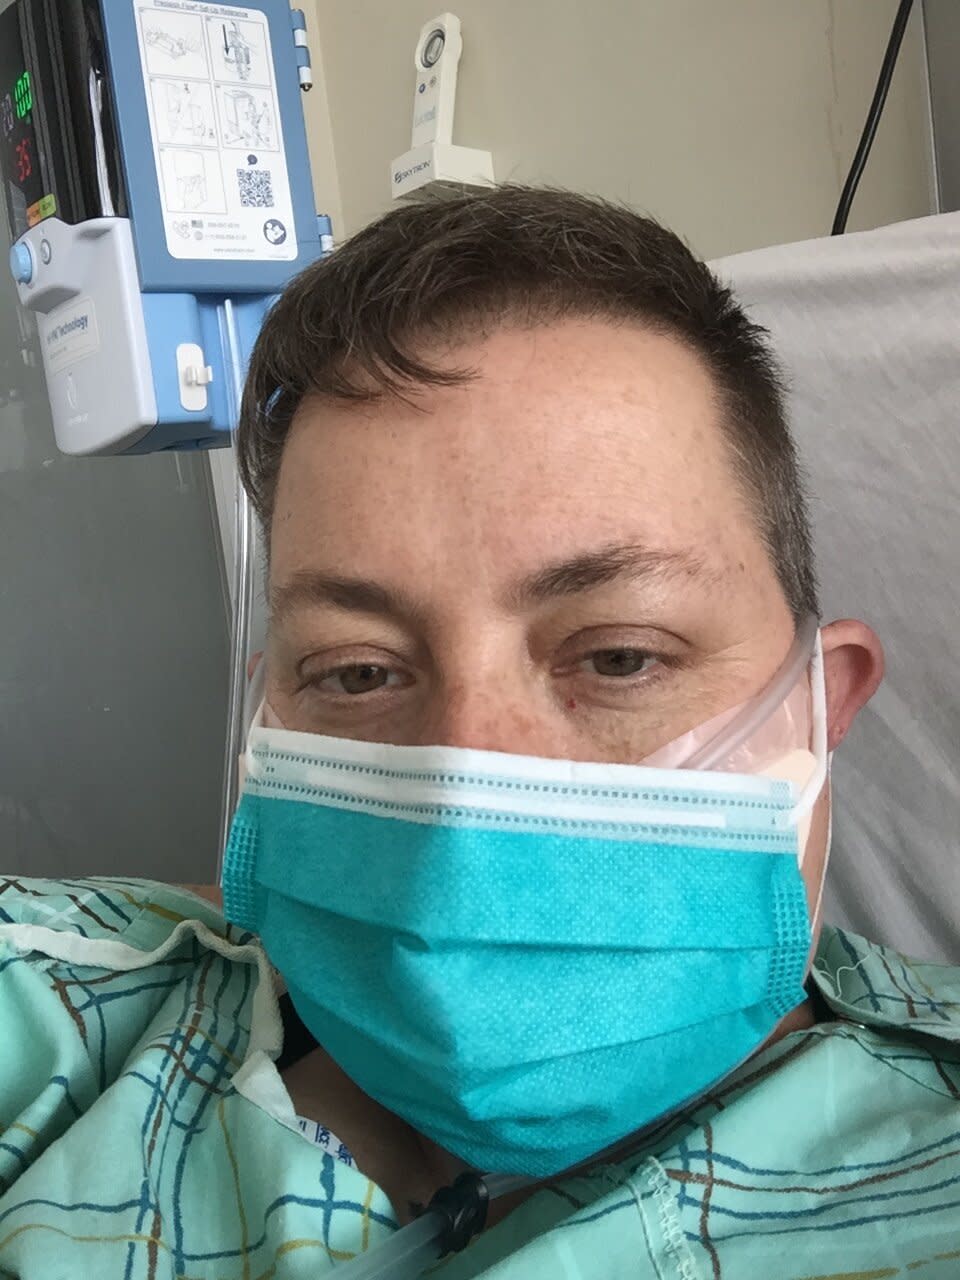 "Some patients find this a little windy," explained the respiratory therapist about the high flow nasal cannula, "or maybe like you have a garden hose up your nose." (Photo: Courtesy of Kelli Dunham)